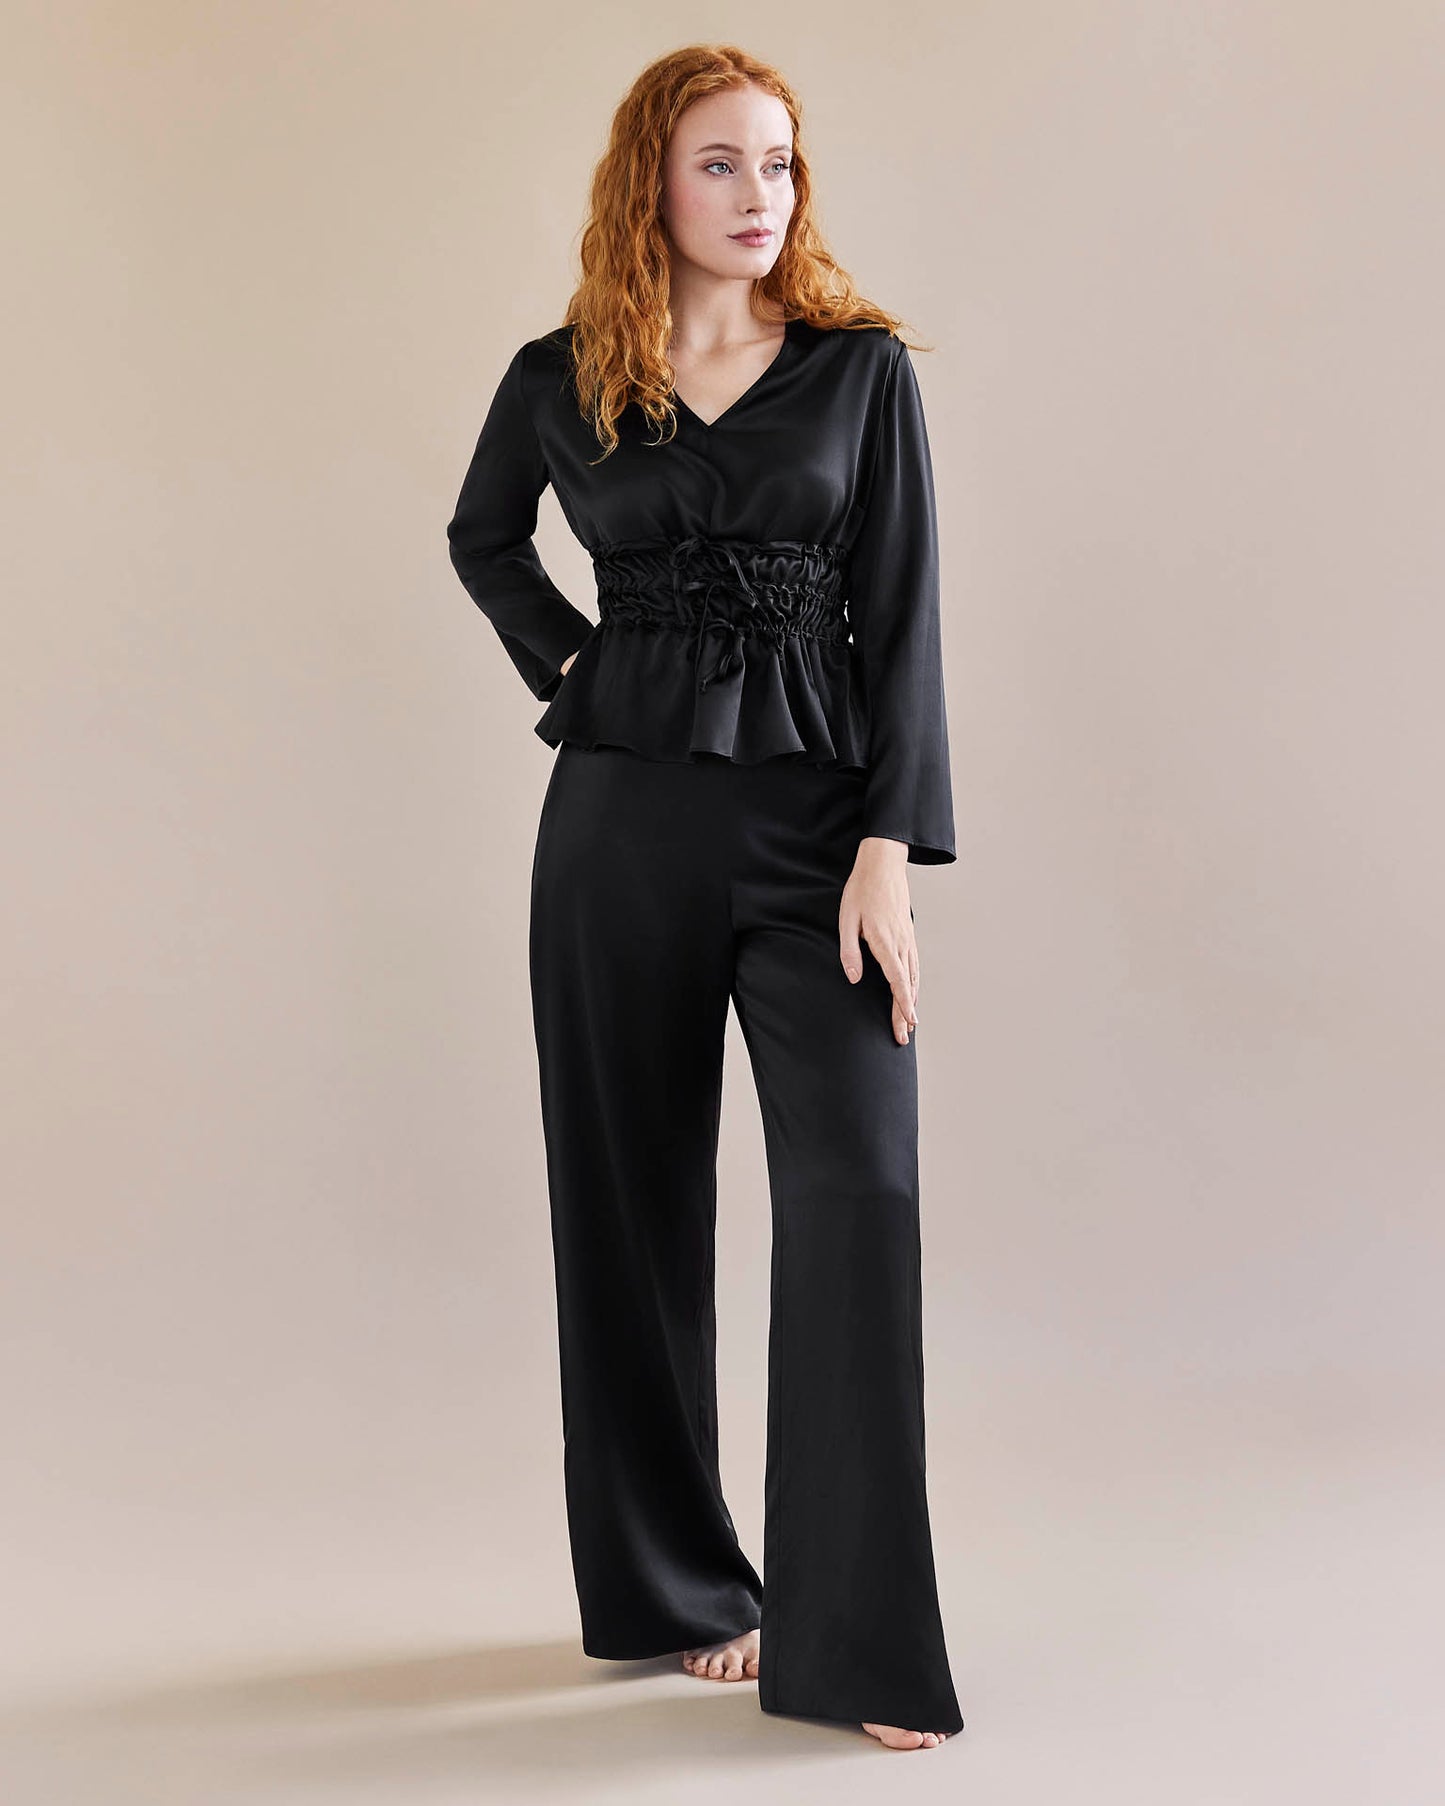 Model wears black silk tie waist top coached in a waist for an hourglass look and a pair of black, silk, wide legged trousers with a tuxedo stripe